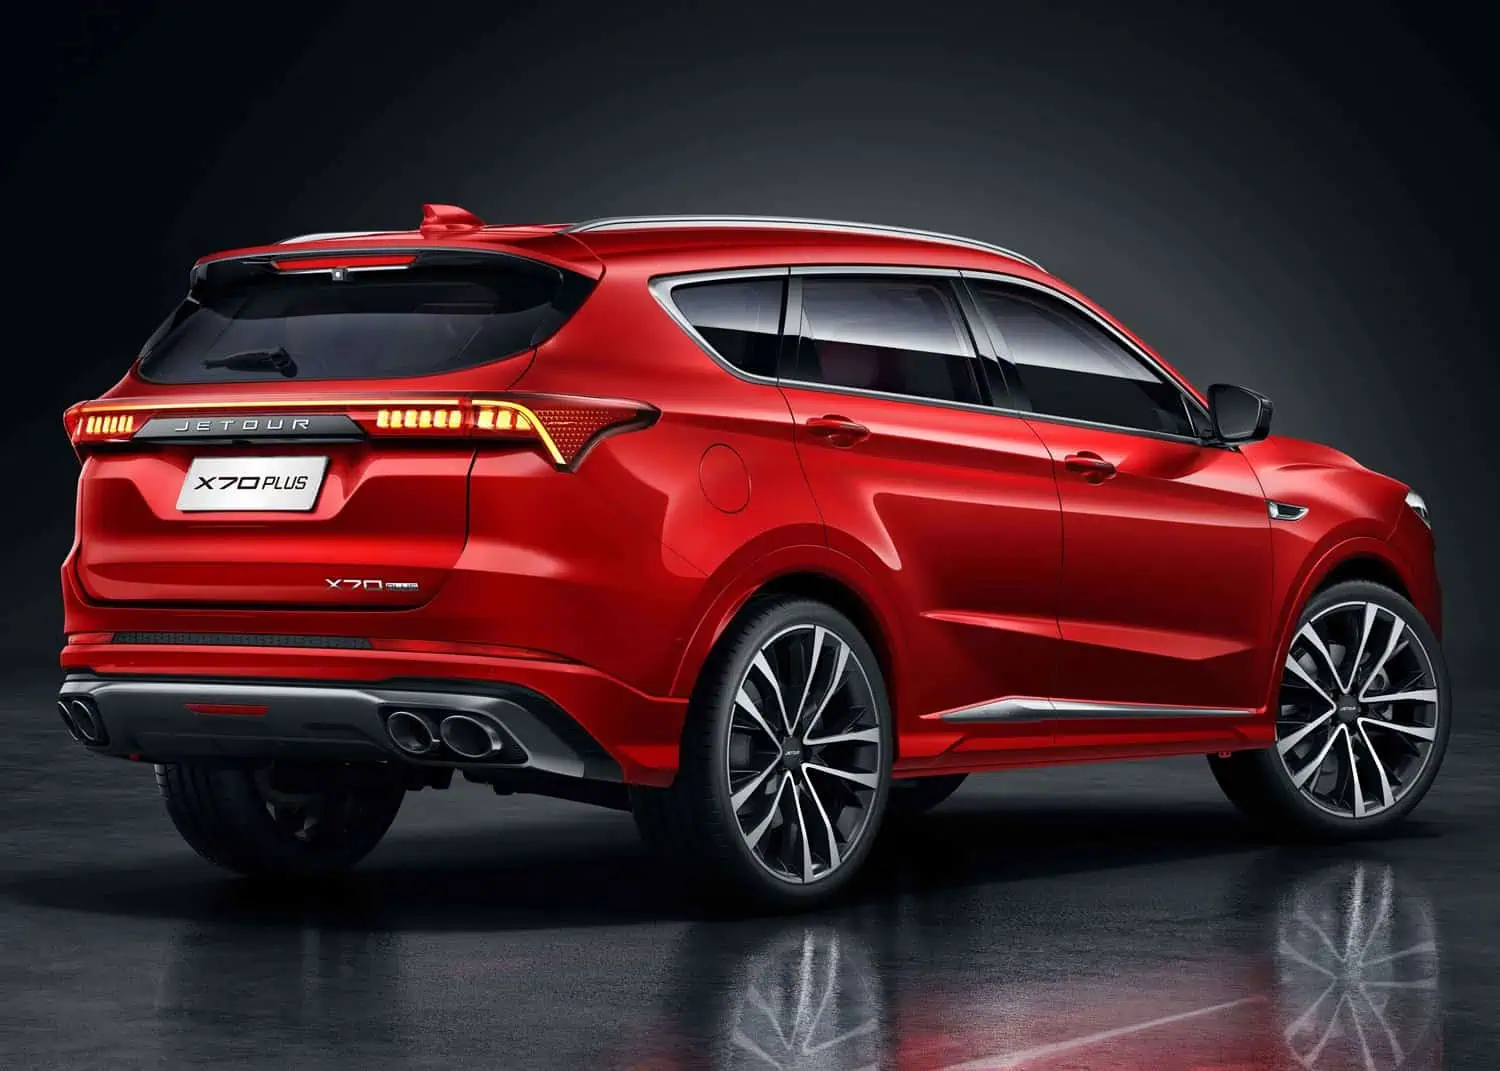 China's latest SUV brand provides more details